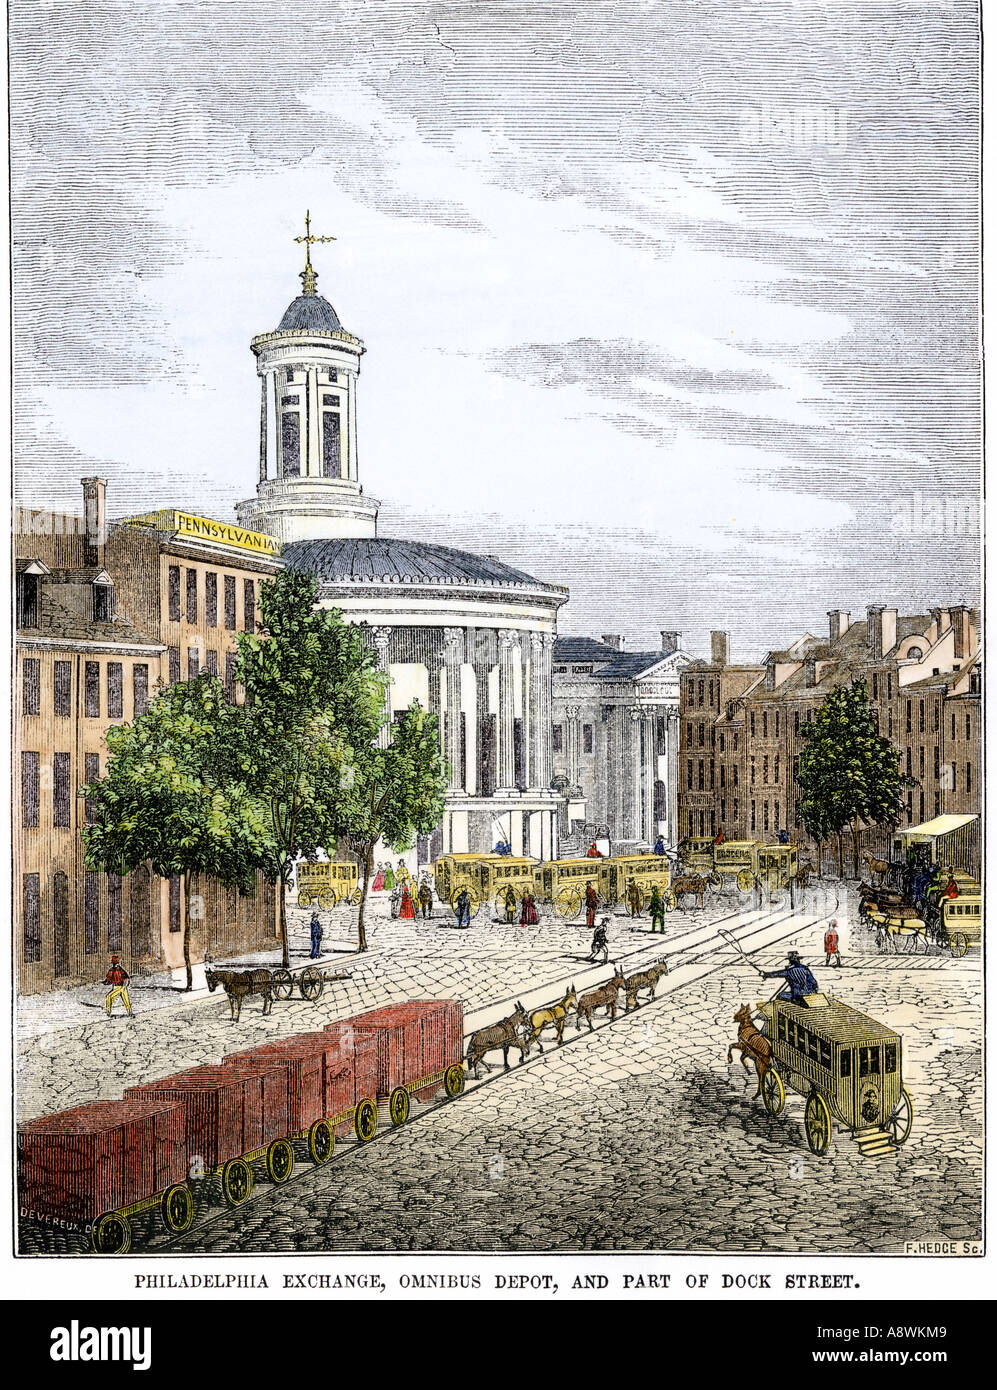 Philadelphia Exchange and the omnibus depot and part of Dock Street 1850s. Hand-colored woodcut Stock Photo